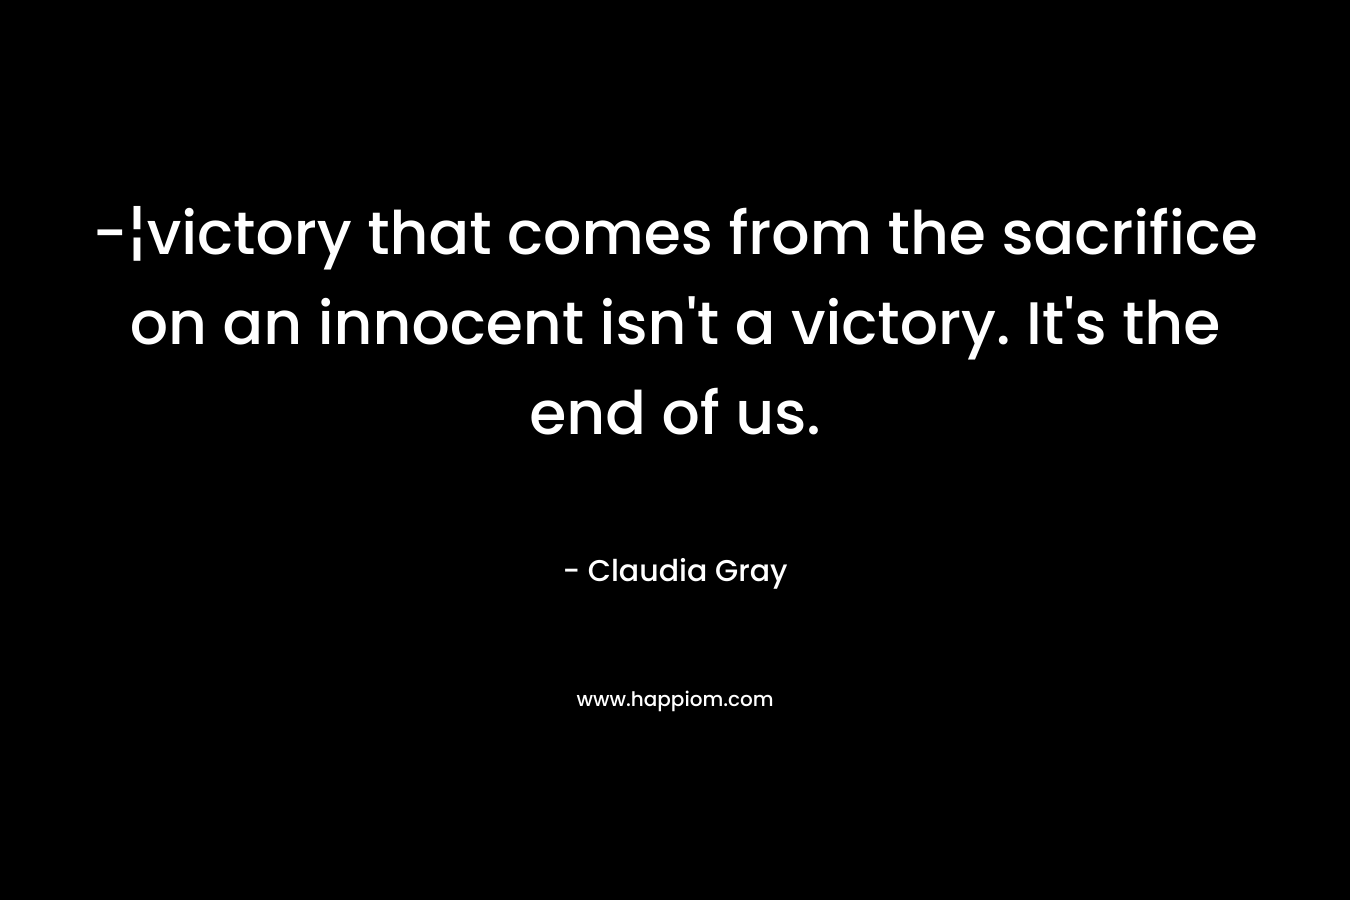 -¦victory that comes from the sacrifice on an innocent isn’t a victory. It’s the end of us. – Claudia Gray